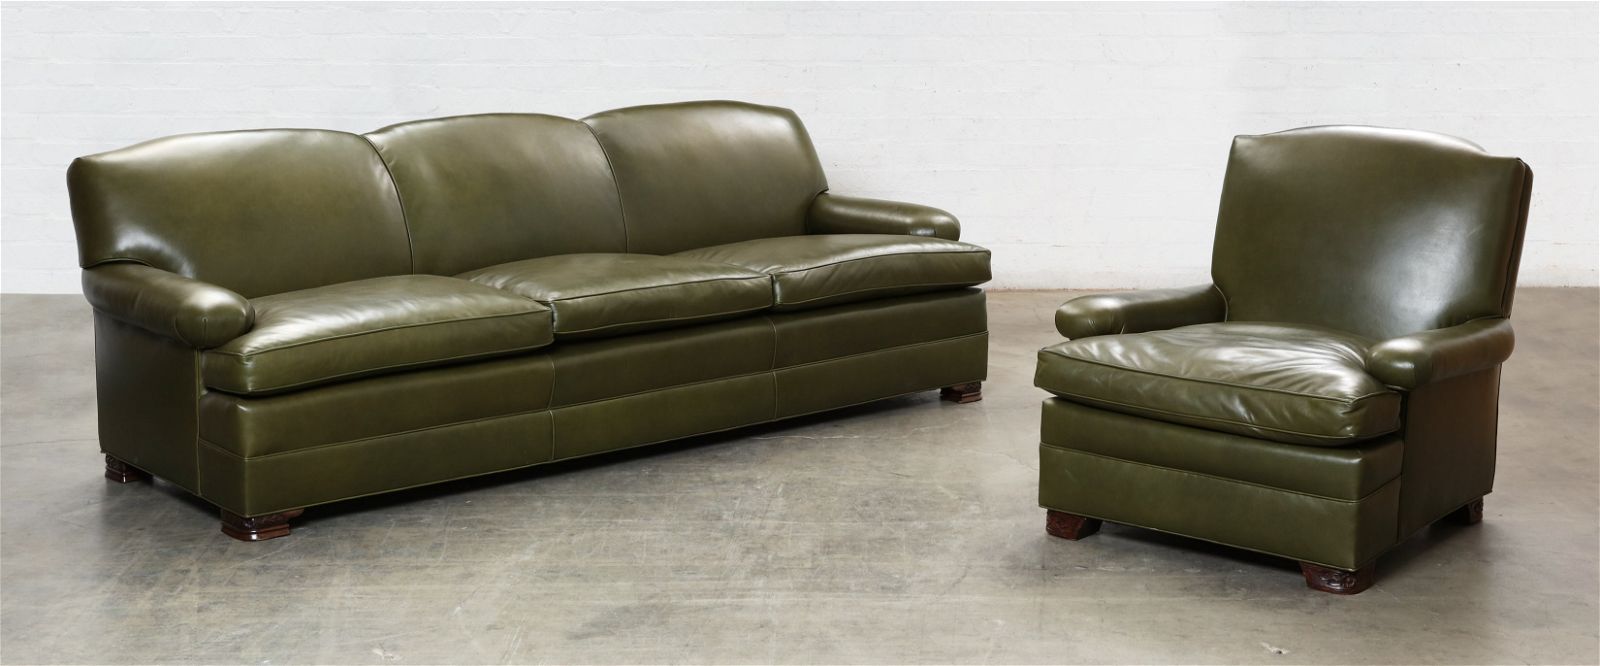 A GREEN LEATHER UPHOLSTERED SOFA 2fb2ac2